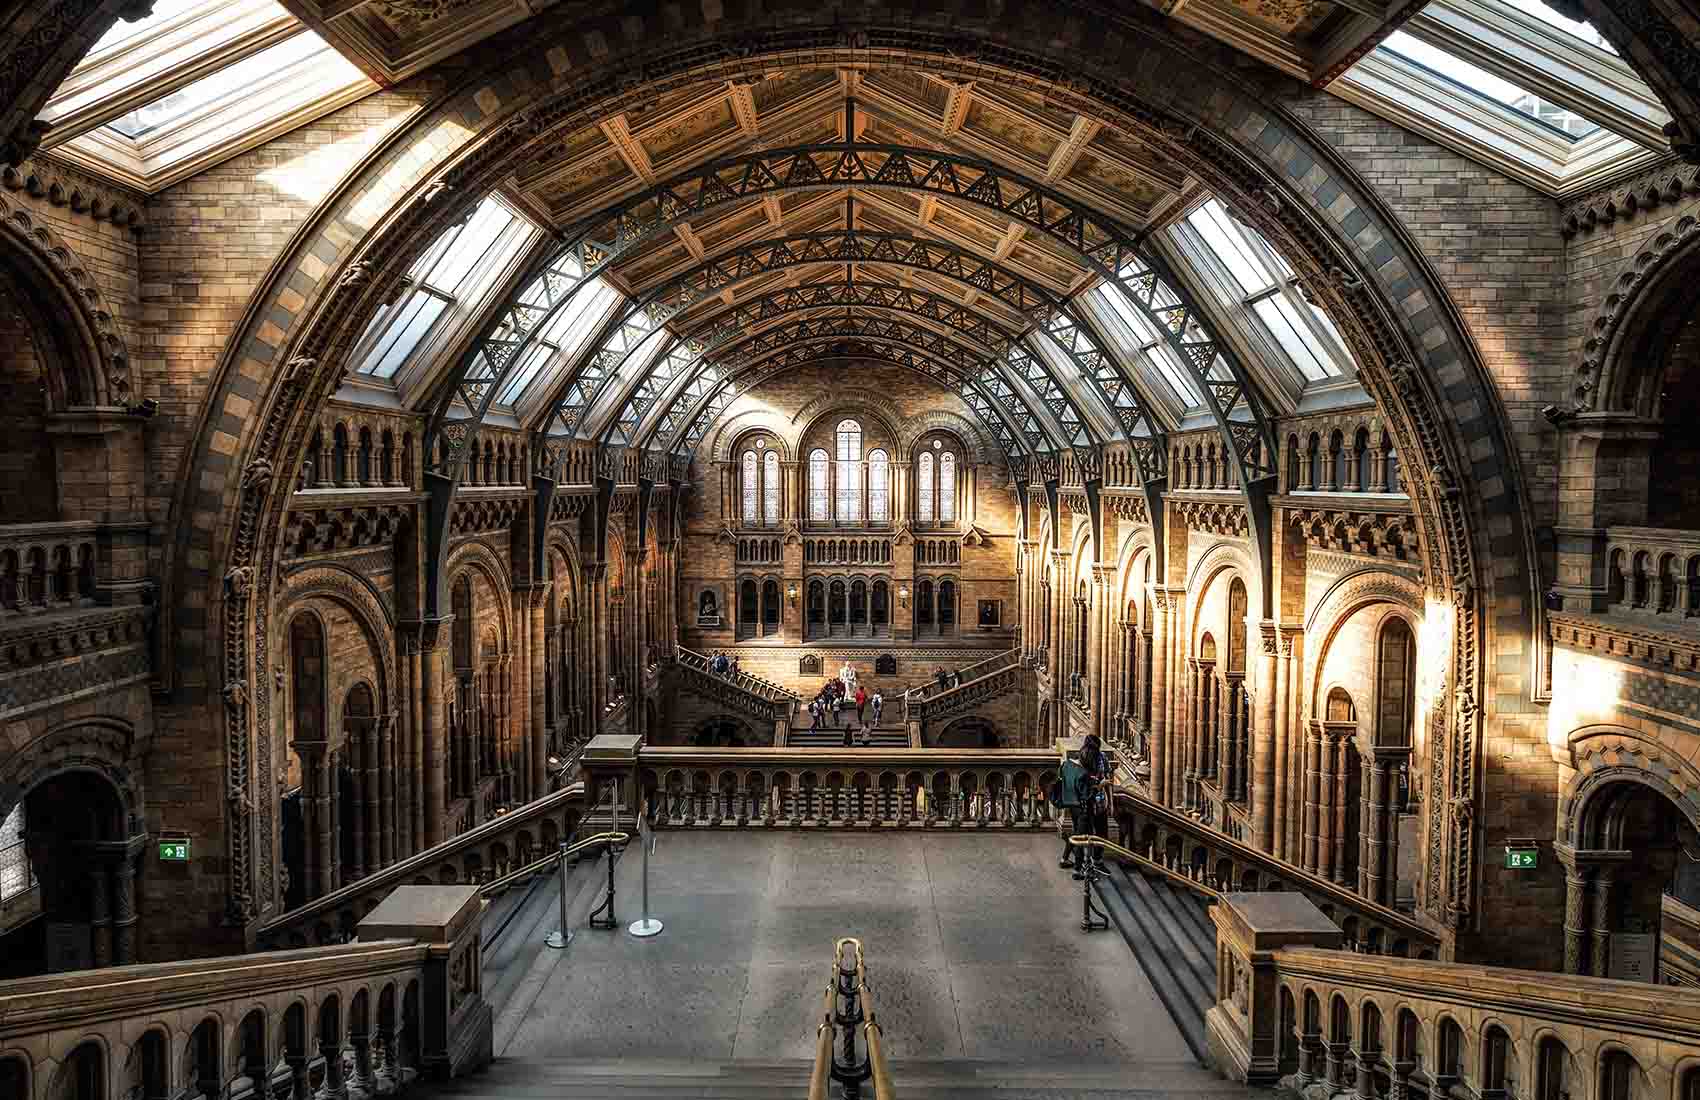 Looking for London free activities? Discover the best free museums in London with our guide! Explore centuries of history and art without spending a dime.